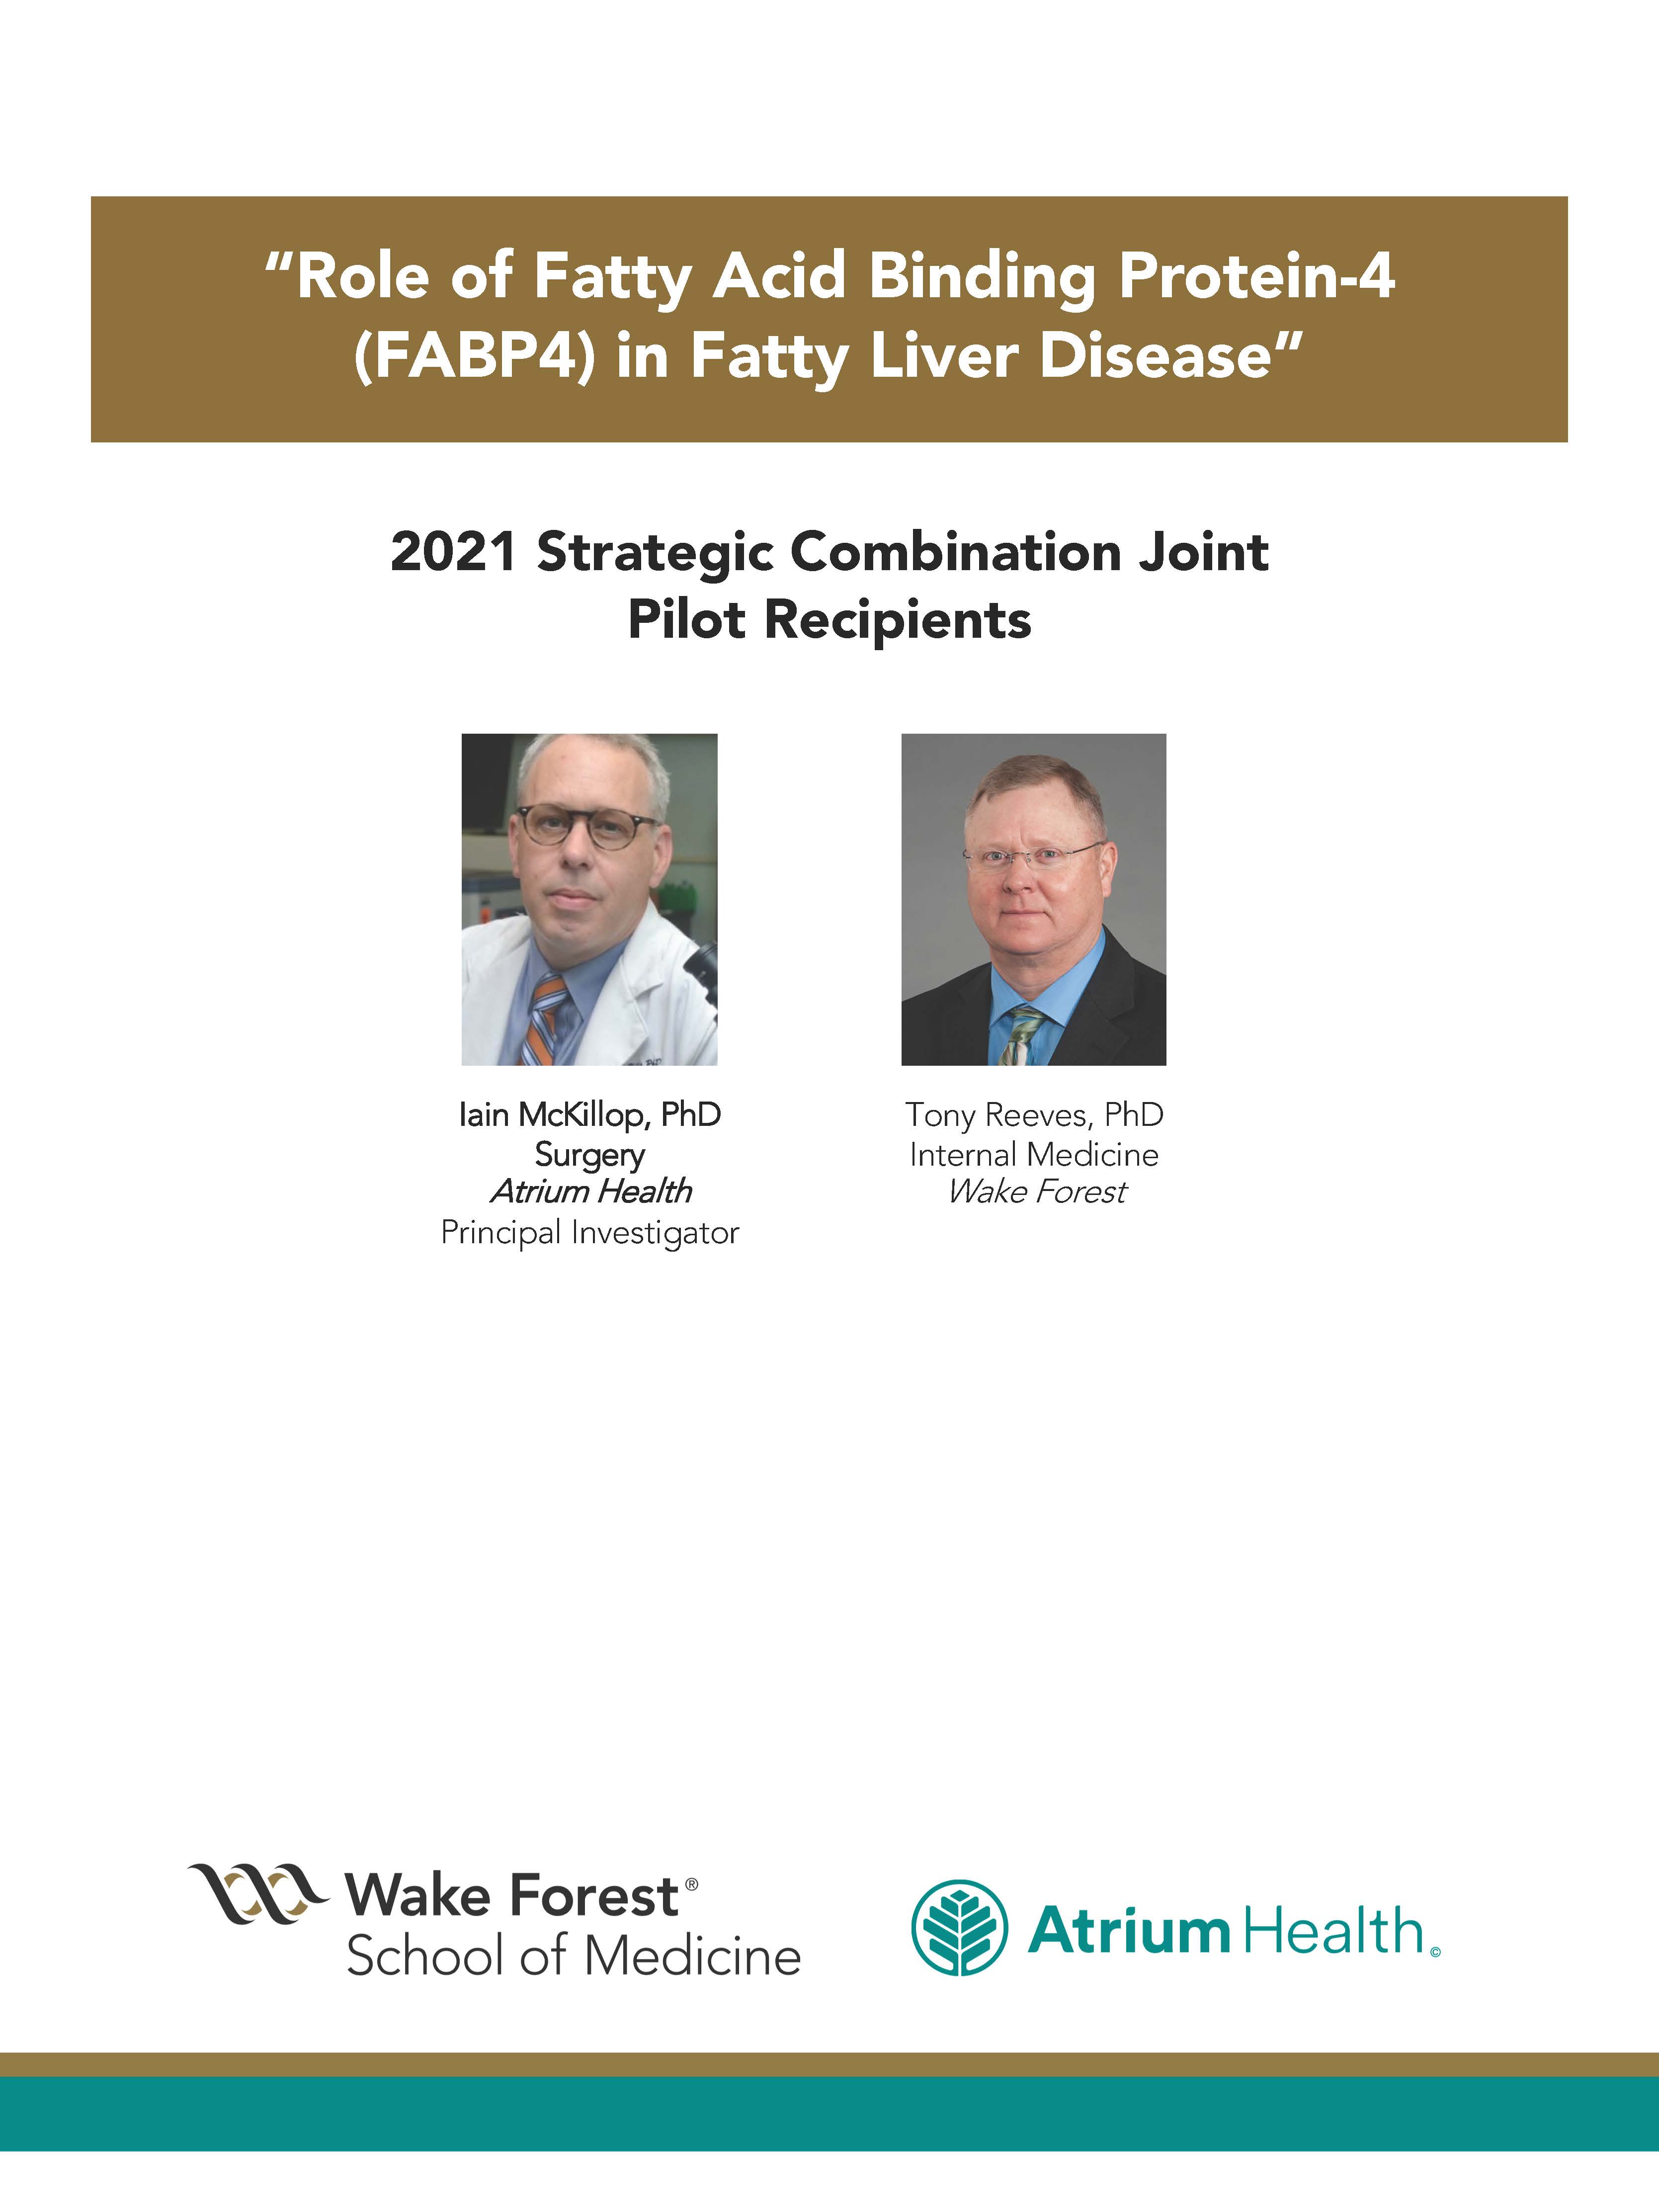 “Role of Fatty Acid Binding Protein-4 (FABP4) in Fatty Liver Disease”